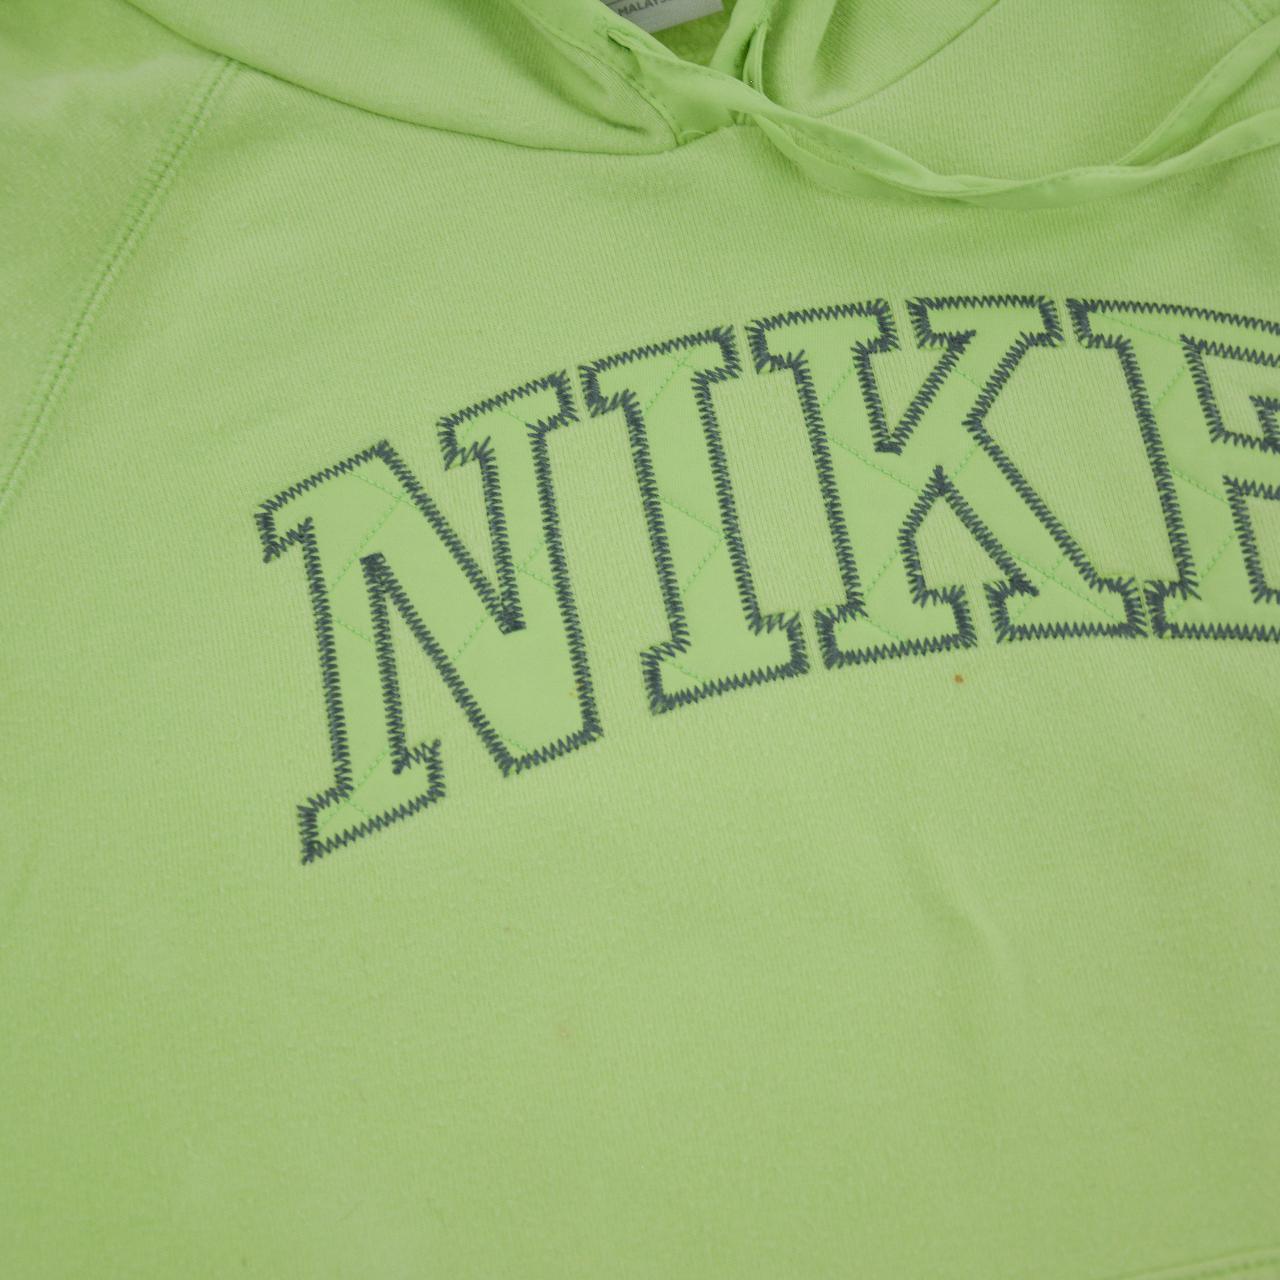 Vintage Nike Hoodie Women's Size S - Known Source